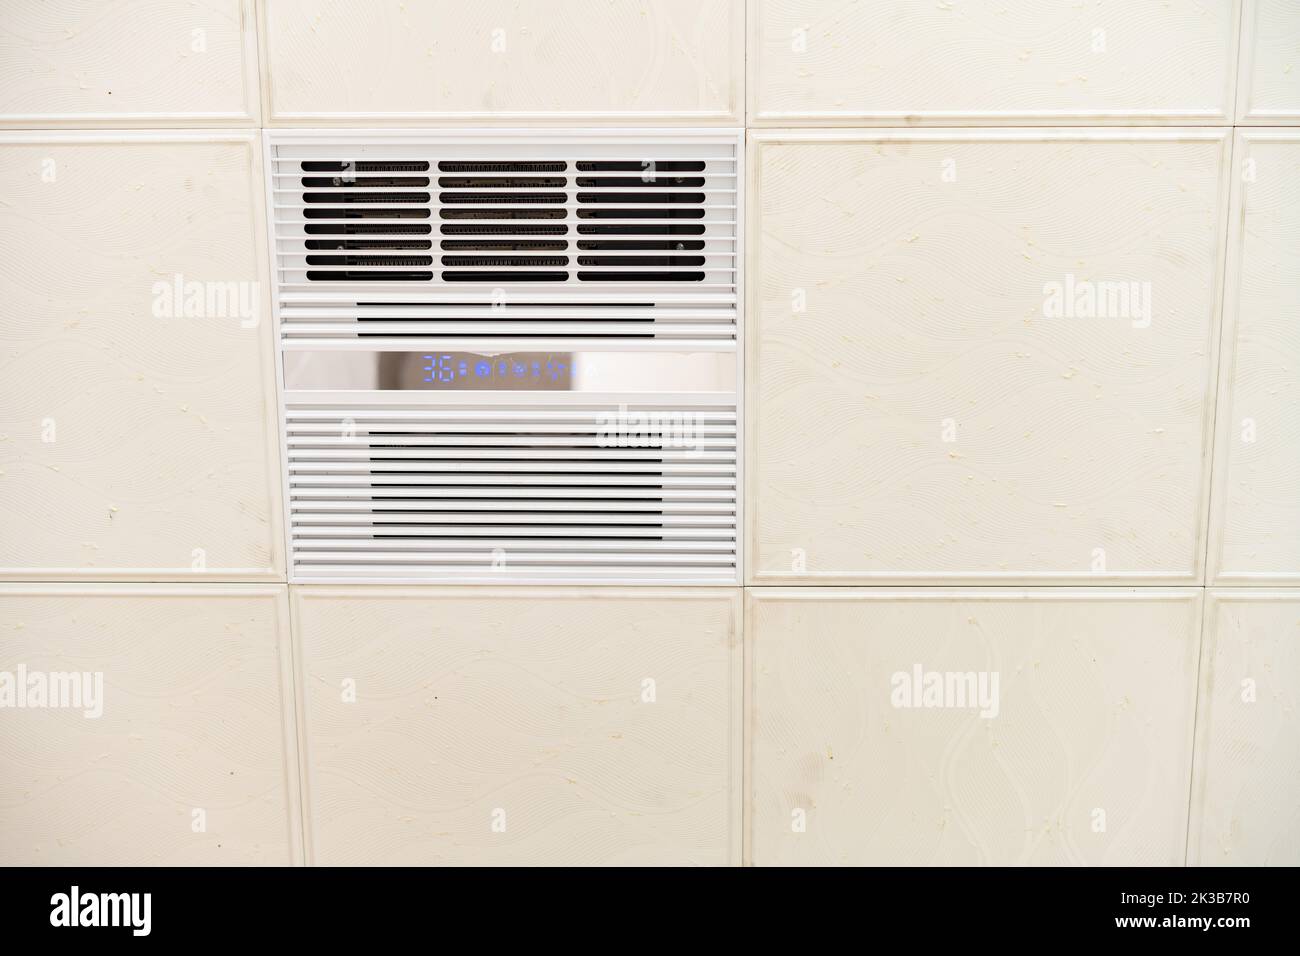 electric heater on the ceiling Stock Photo